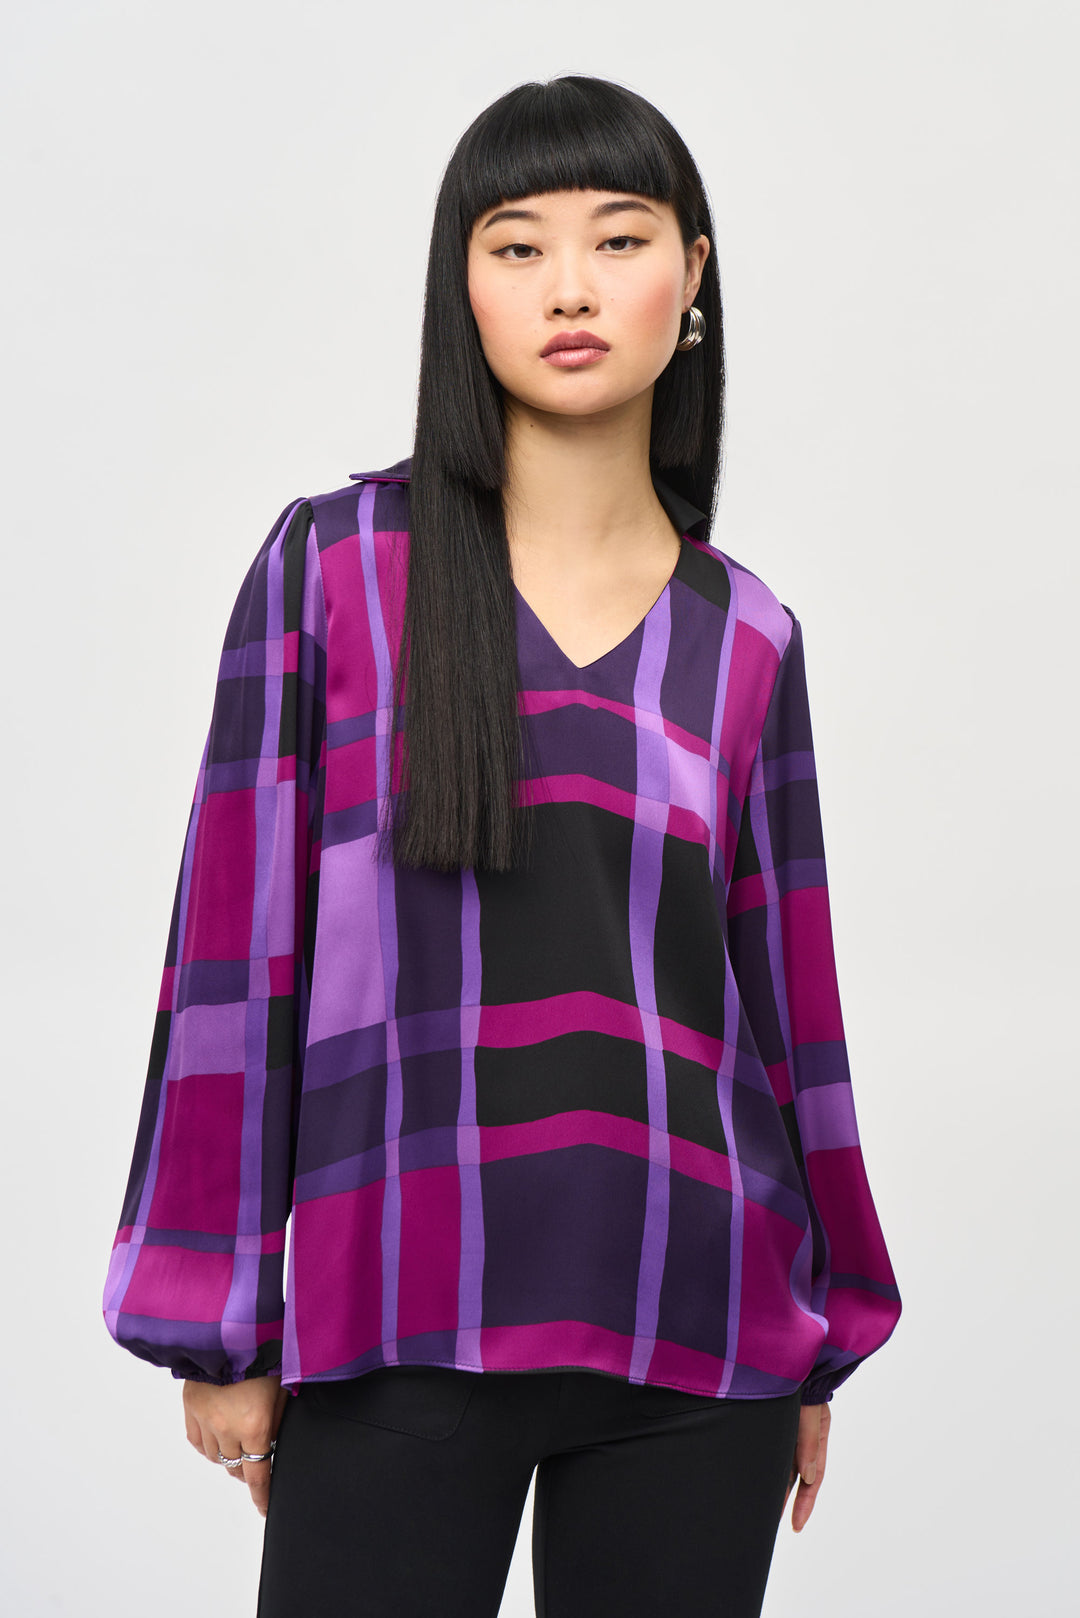 Joseph Ribkoff Fall 2024 Crafted from luxurious satin fabric, this V-neck top boasts a colourful plaid design for a statement-making look. Boxy in style and fit, it features long loose sleeves with elastic cuffs and a sharp V-neckline. 